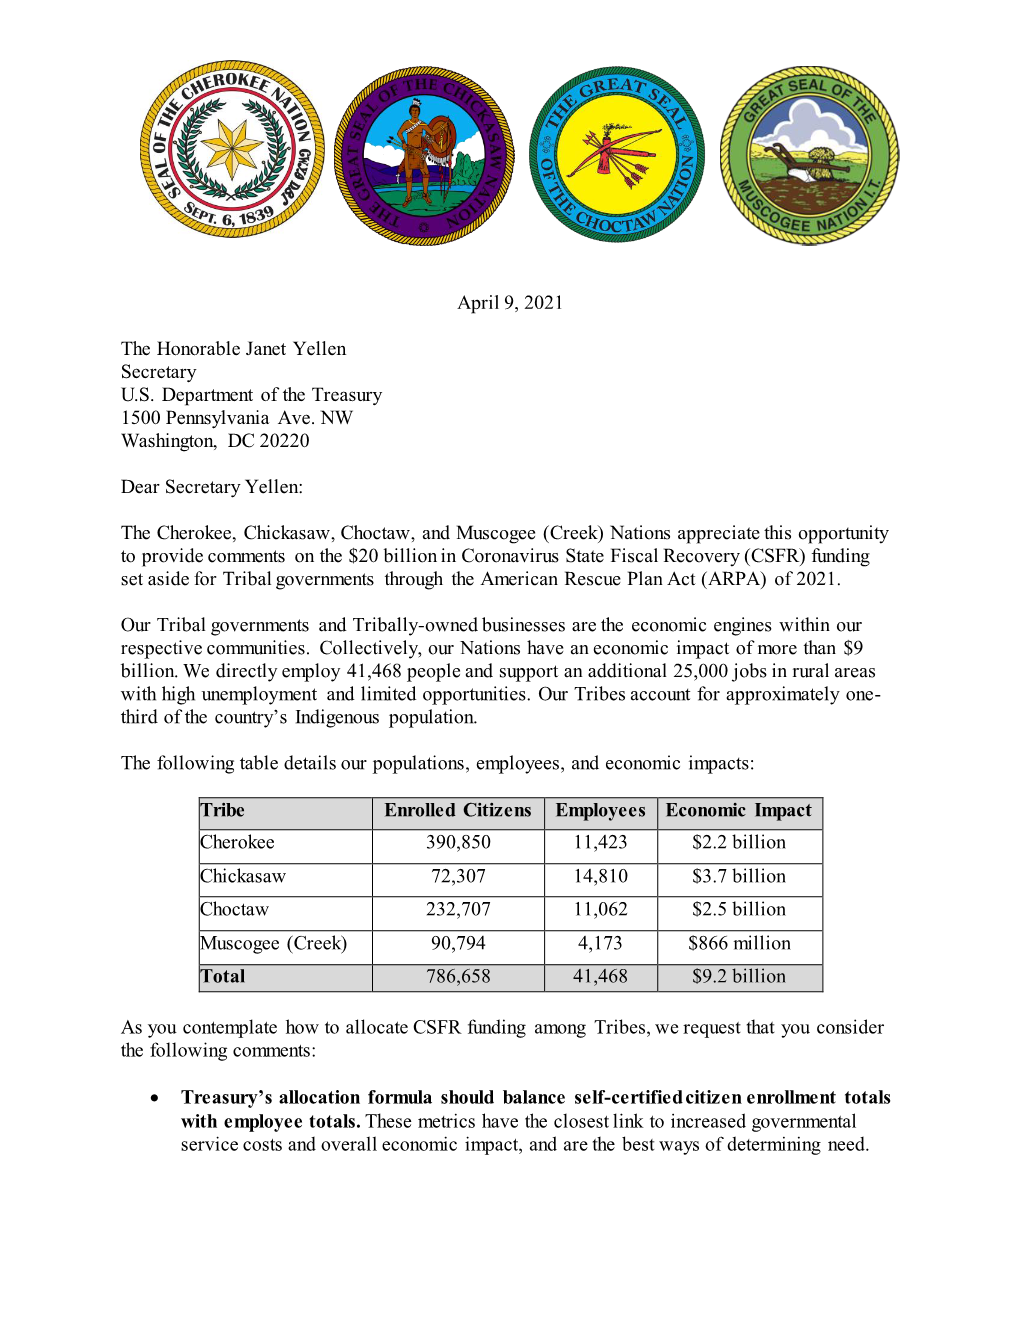 April 09, 2021: Comments to the U.S. Treasury on the Coronavirus State